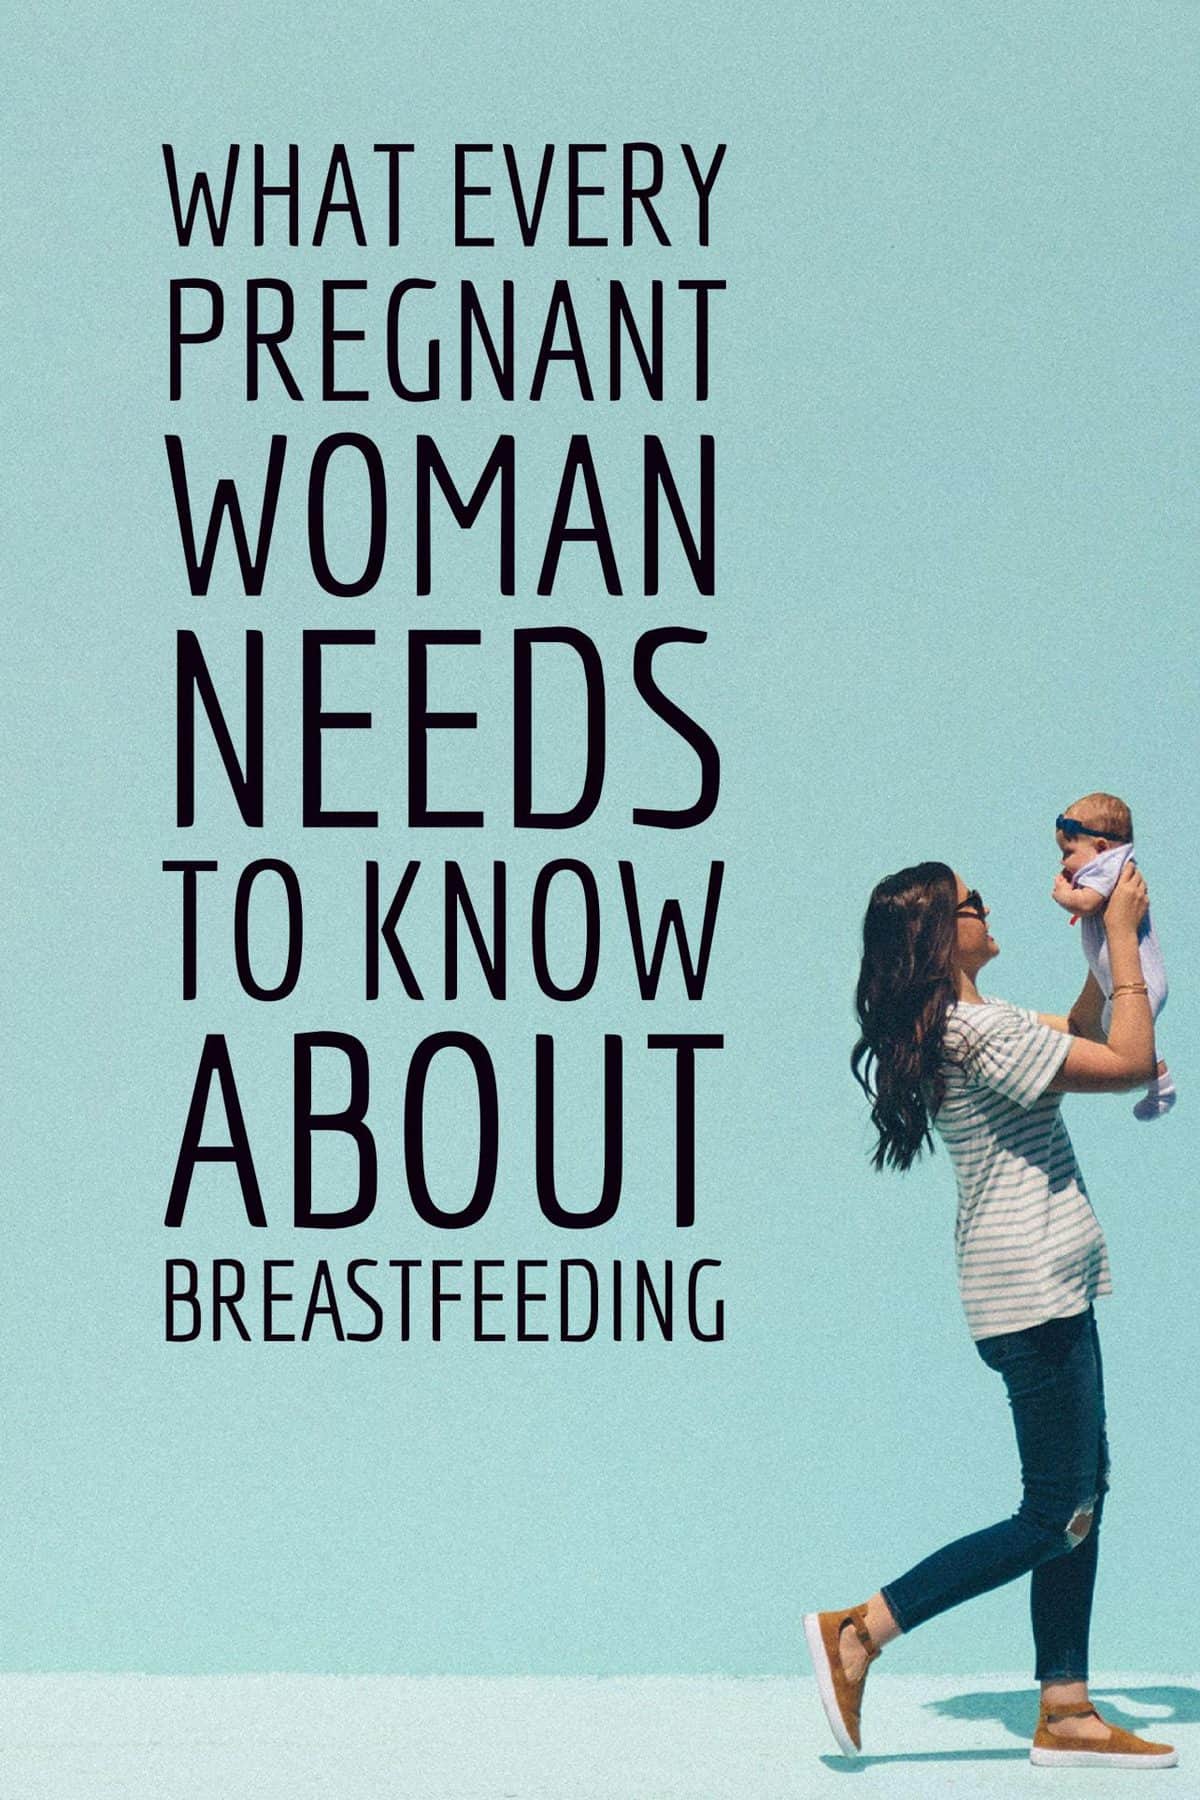 10 Things Every Pregnant Woman Should Know About Breastfeeding Part 1 Smart Nutrition With